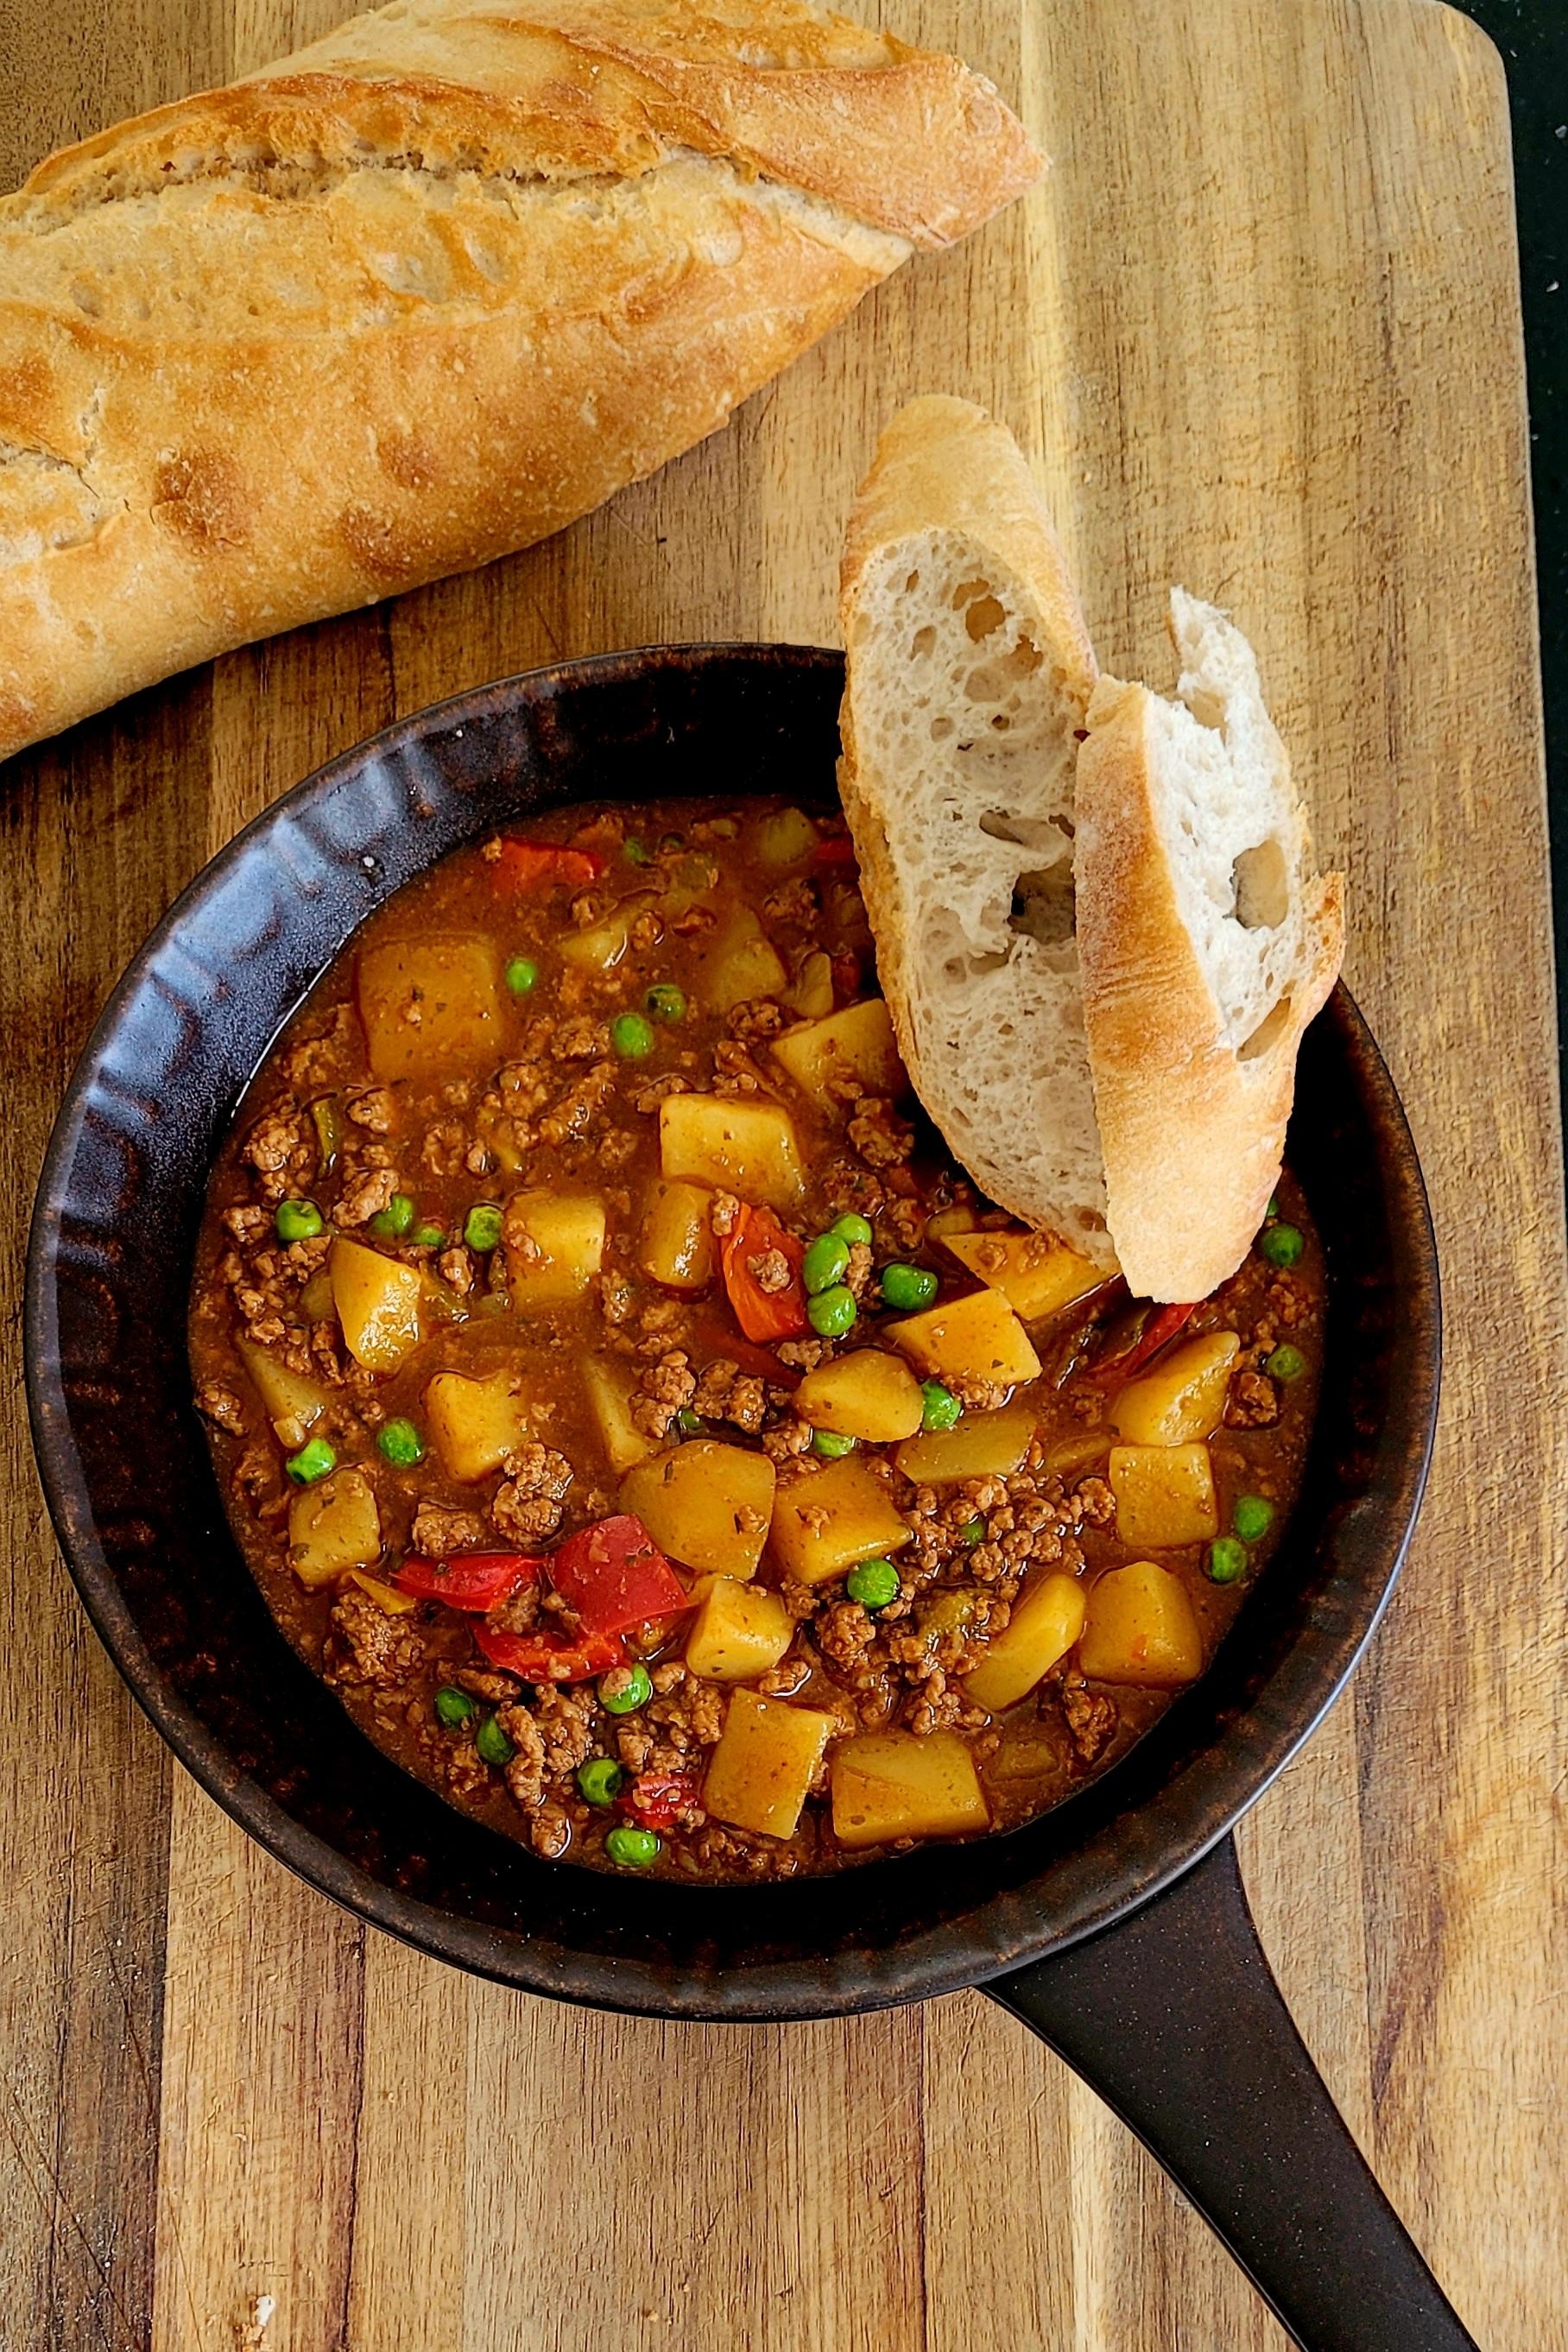 Ground beef and vegetable stew in a skillet, served with a side of bread